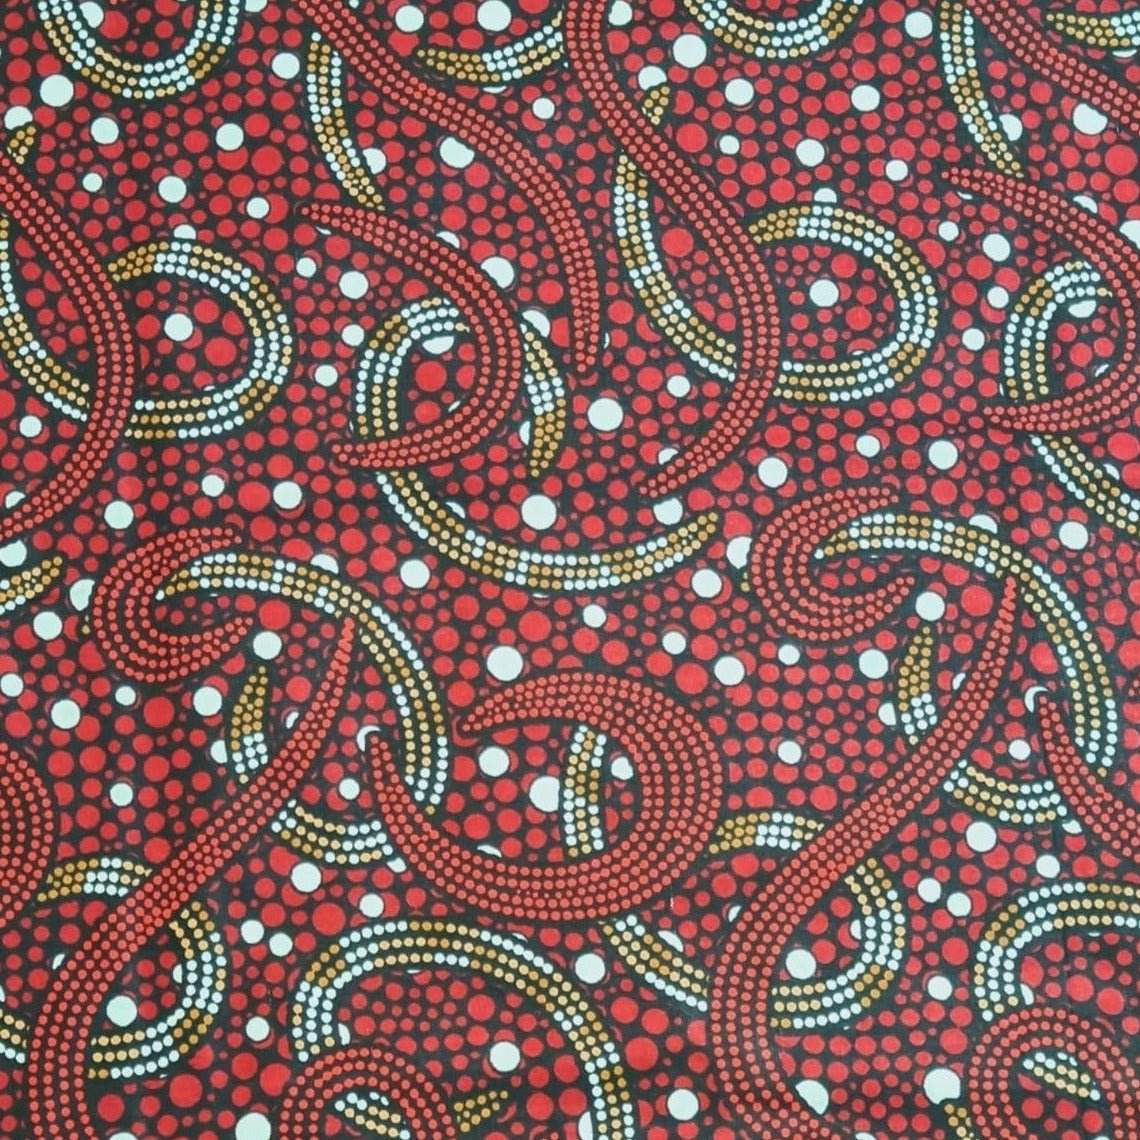 Red and Brown Swirl Print Ankara Fabric - akpy3054 - House of Prints